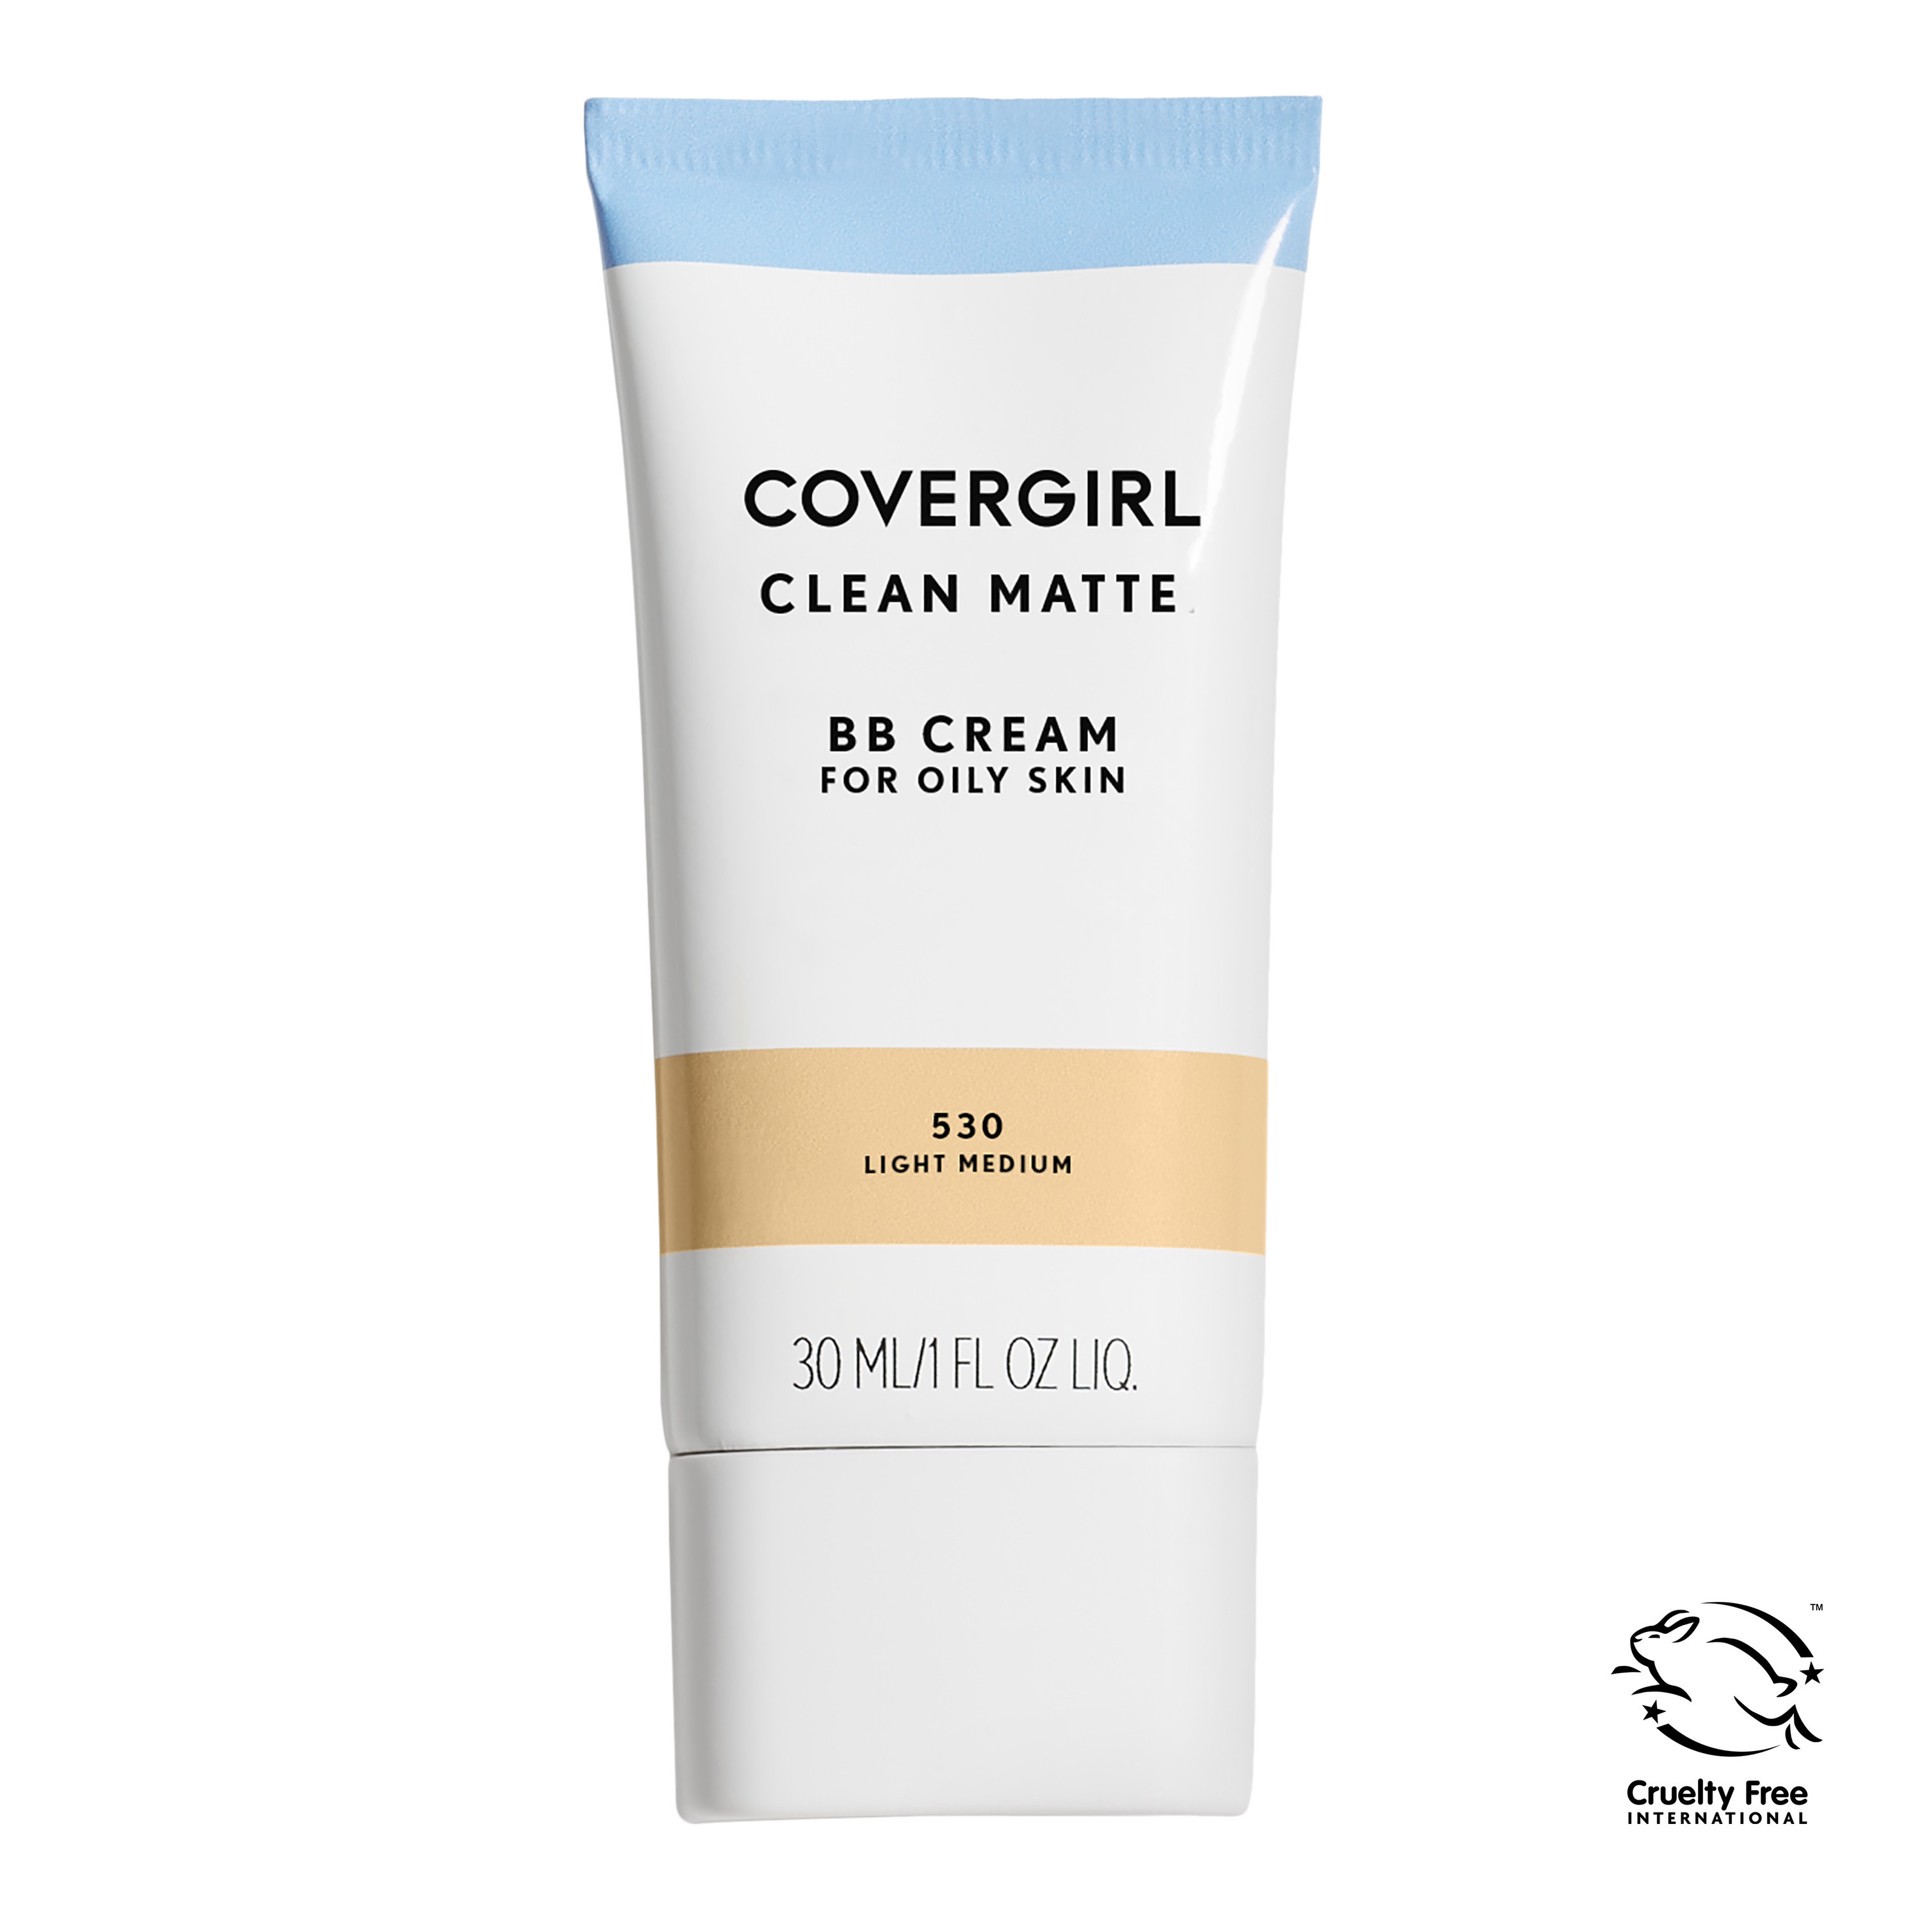 slide 1 of 3, Covergirl COVERGIRL Clean Matte BB Cream For Oily Skin, Oil- Free Finish BB Cream, 1 Fl Oz, Bb Cream Foundation, No Clogged Pores, Evens Skin Tone and Hides Blemishes, Water Based Foundation, Easy Application, 30 ml